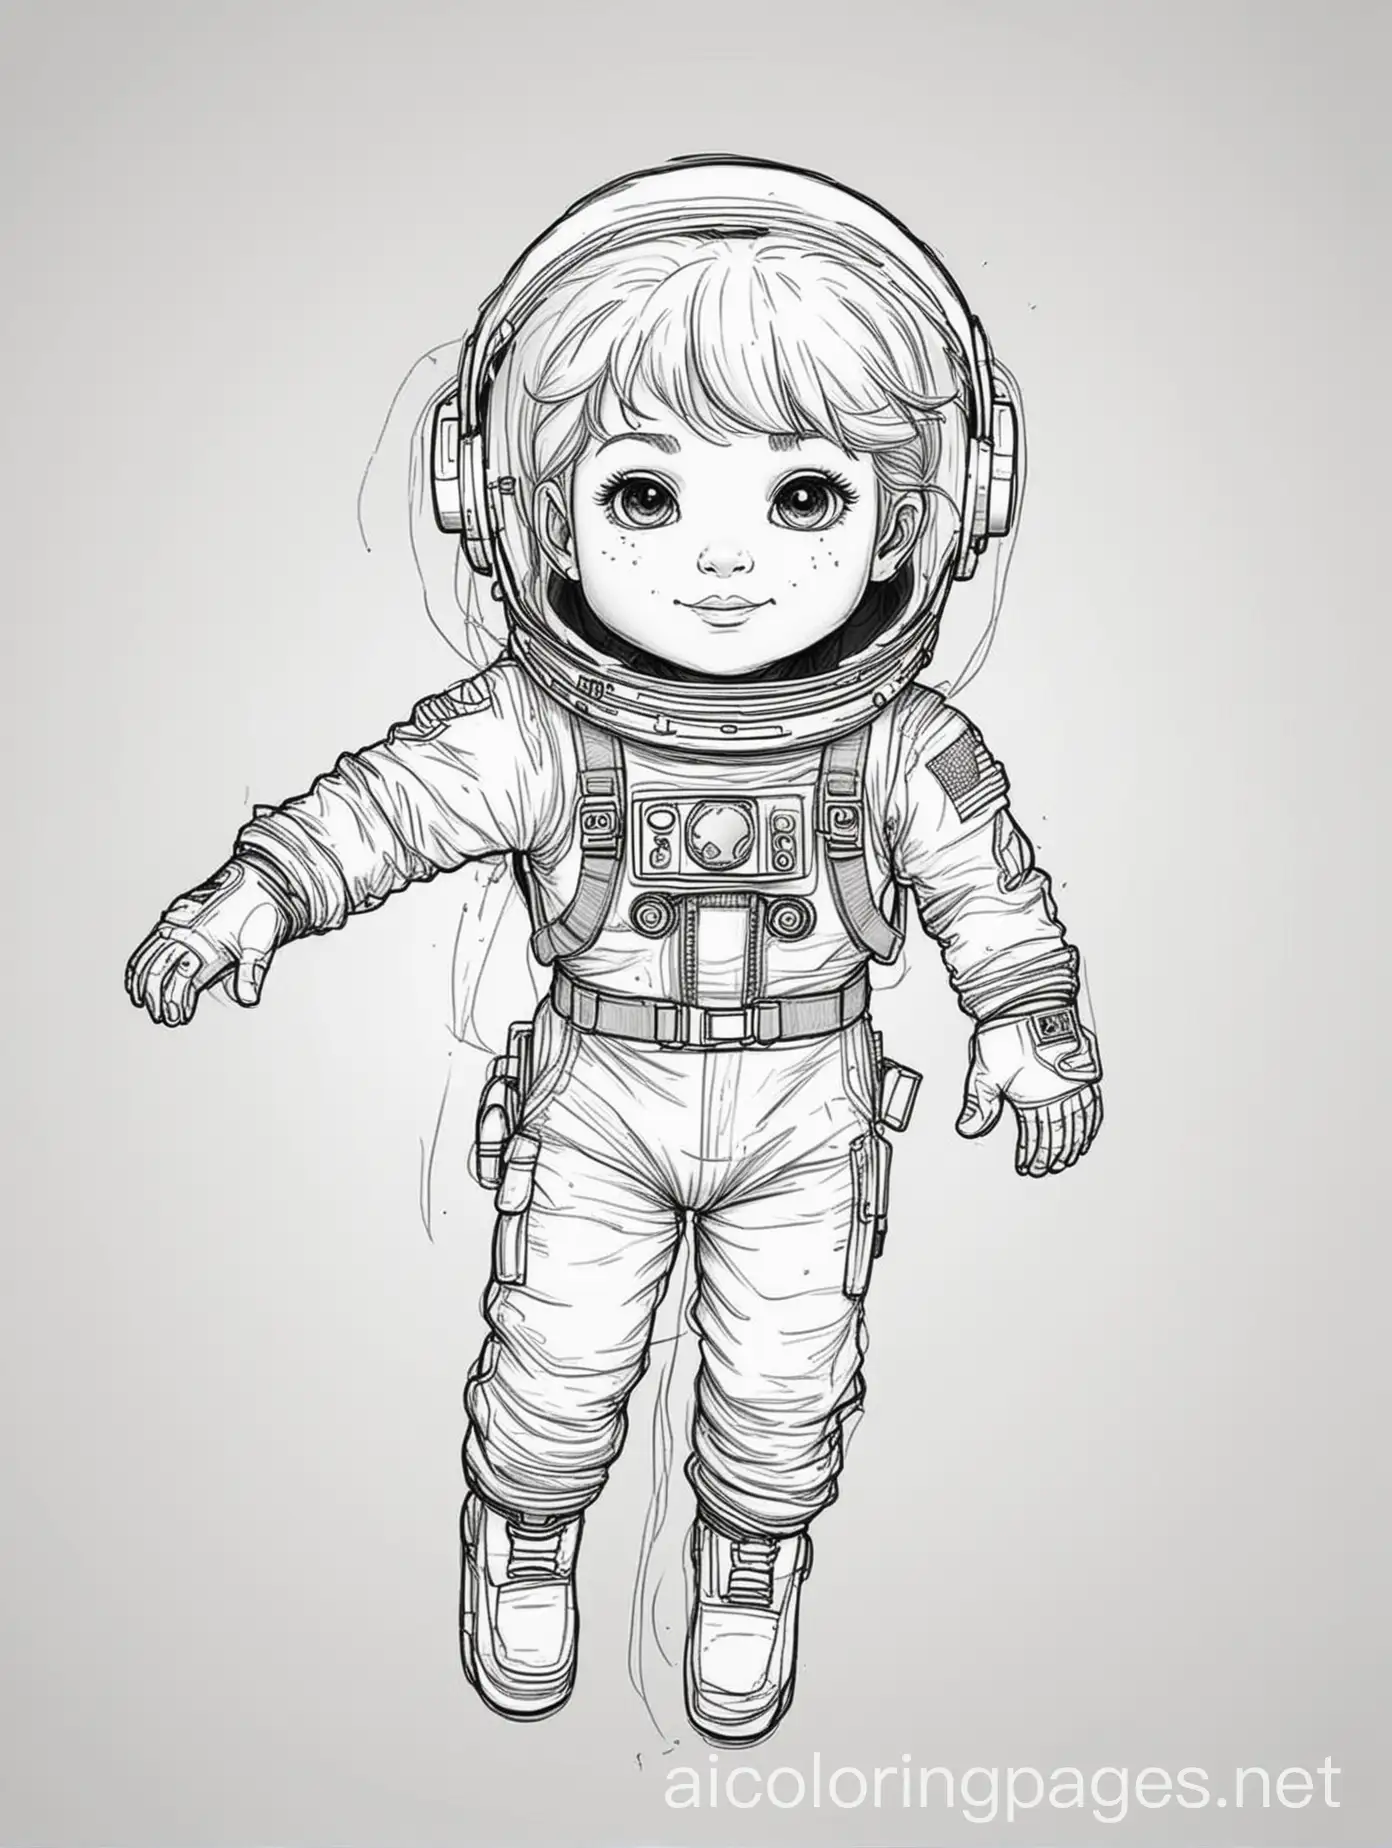 Child astronauts with hair outlined only, floating in zero gravity, coloring page, black and white, line art, white background, Simplicity, Ample White Space. The background of the coloring page is plain white to make it easier for children to color within the lines. The outlines of all the subjects are easy to distinguish, making it simple for kids to color without too much difficulty